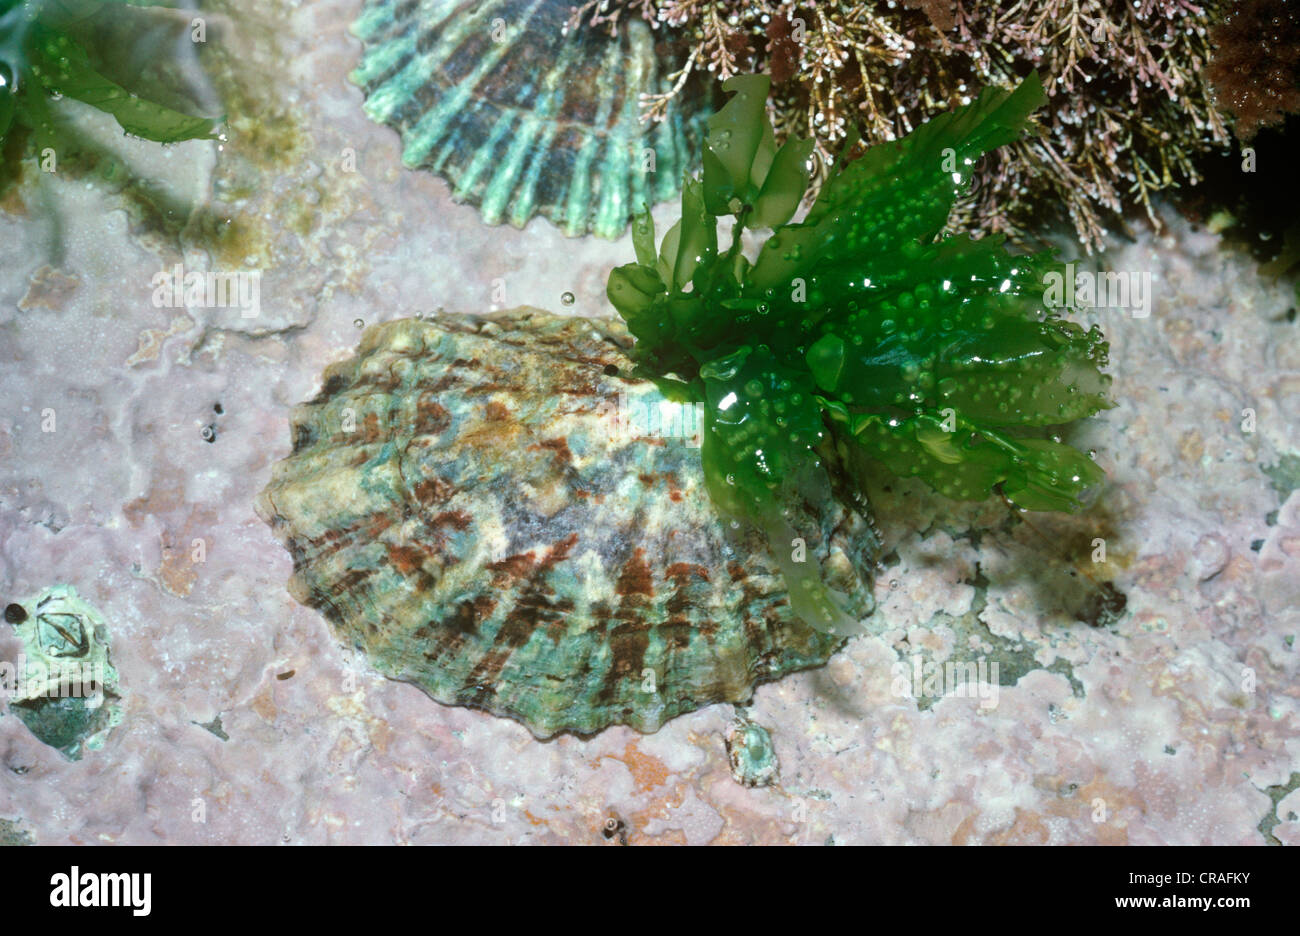 Common limpet (Patella vulgata: Patellidae) with a green seaweed growing on its shell UK Stock Photo